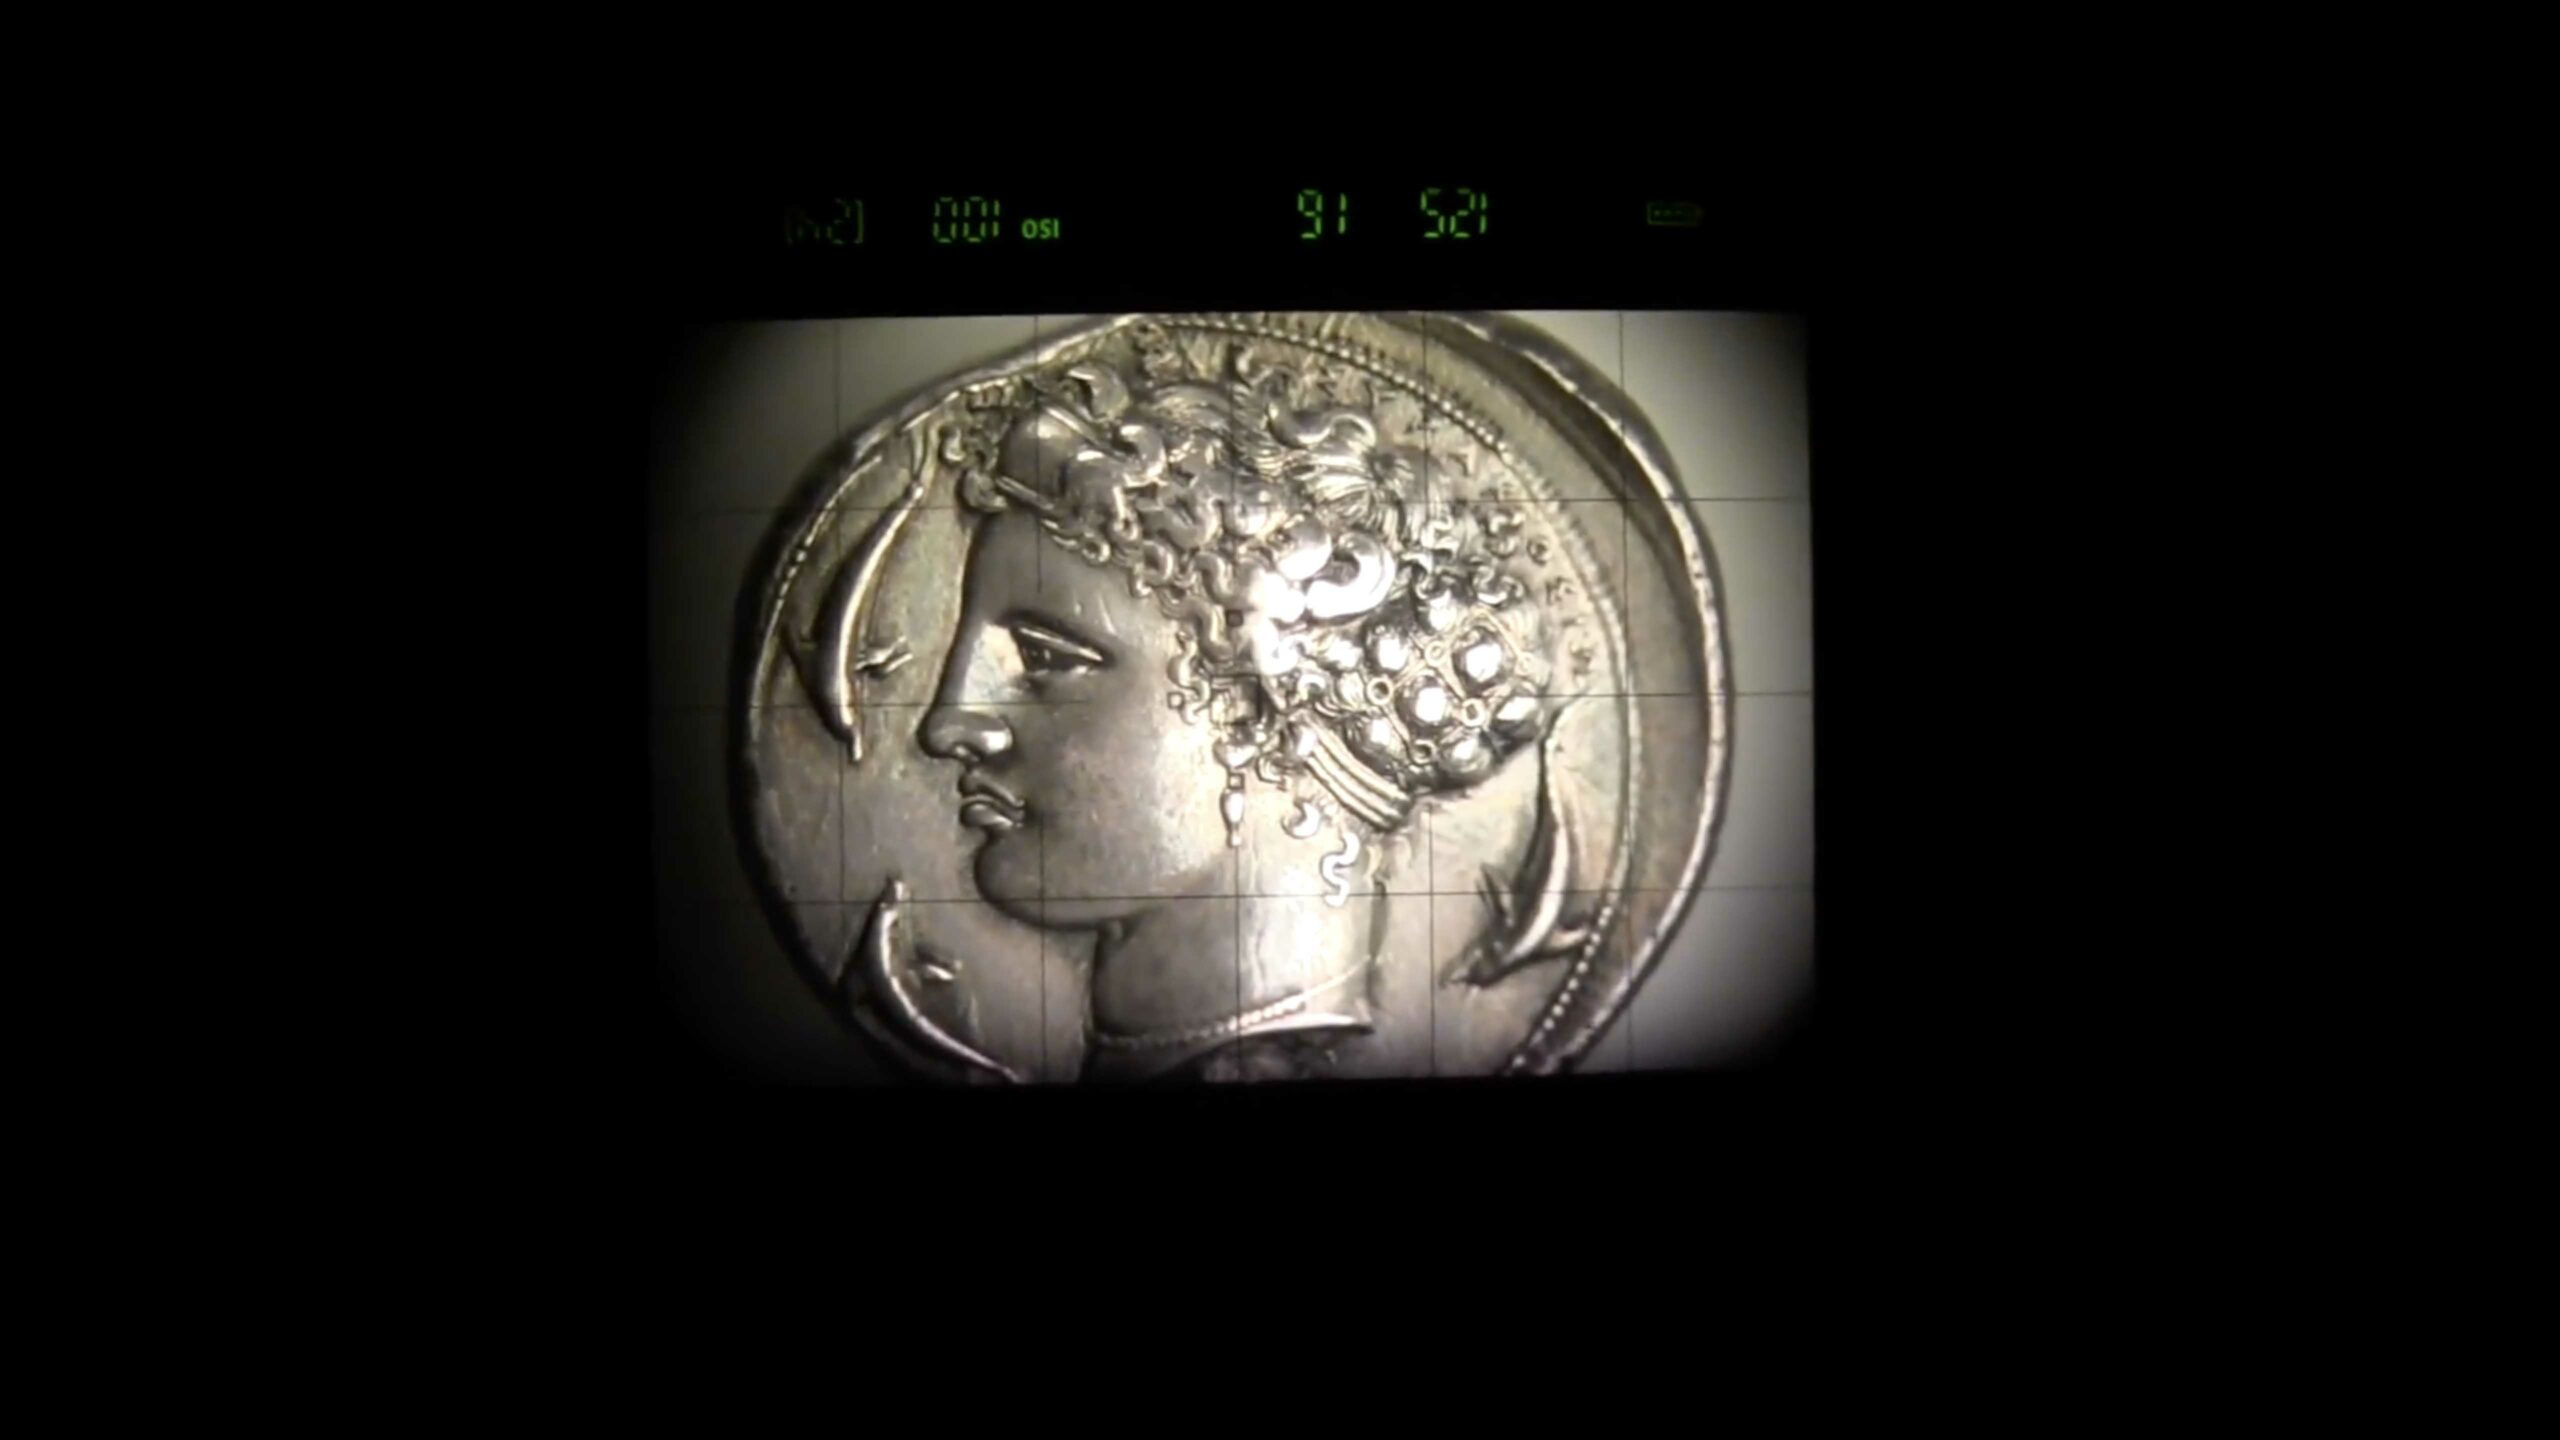 New Focus-Stacking Photographic Technique for Coins